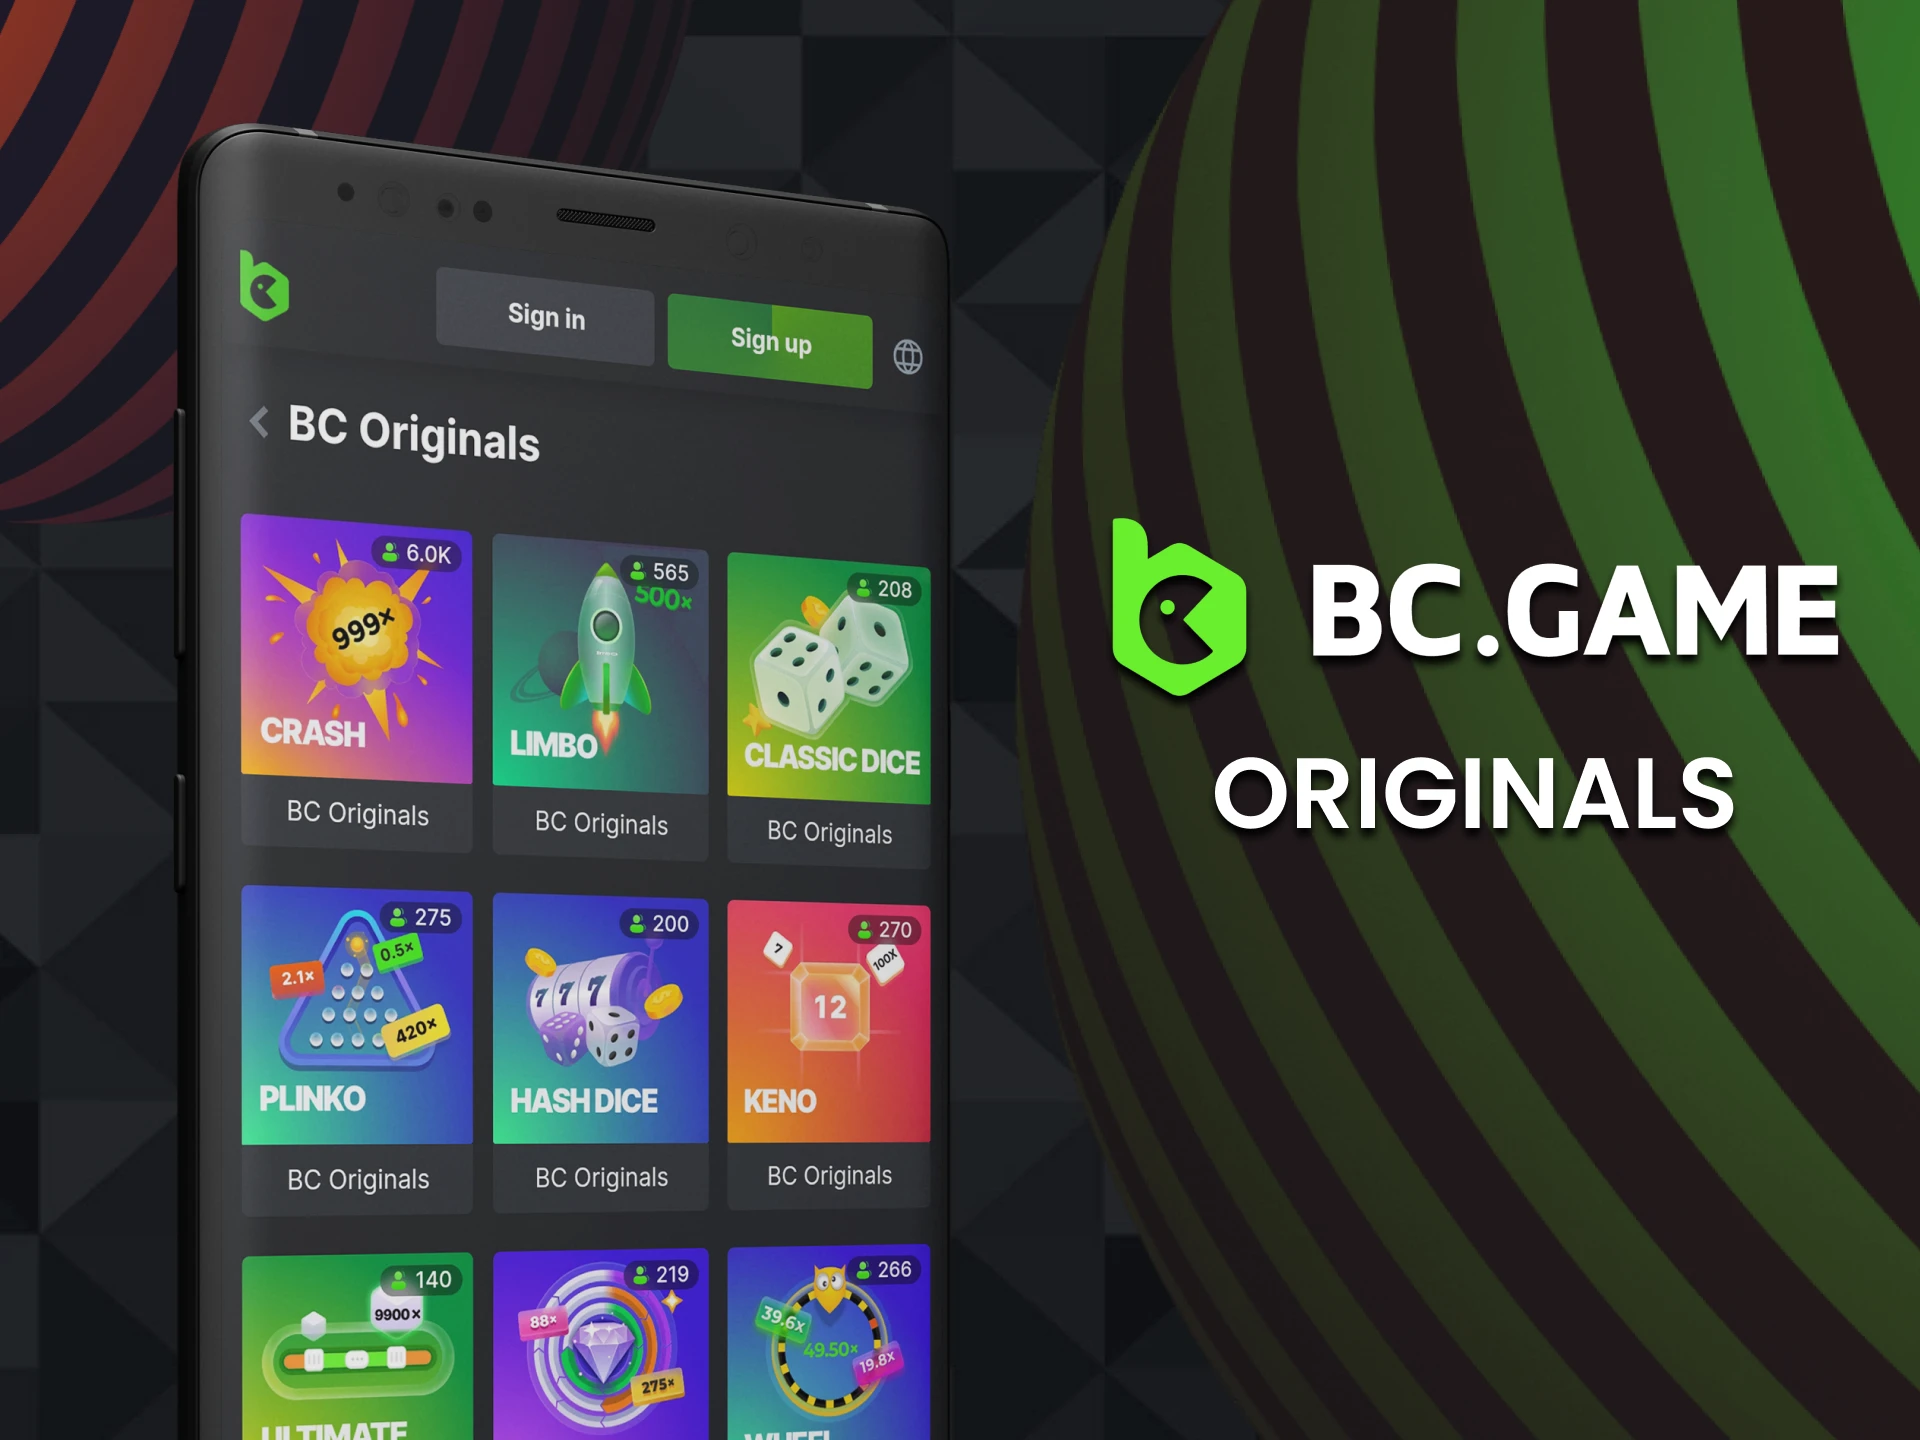 Play originals games in the BC Game app.